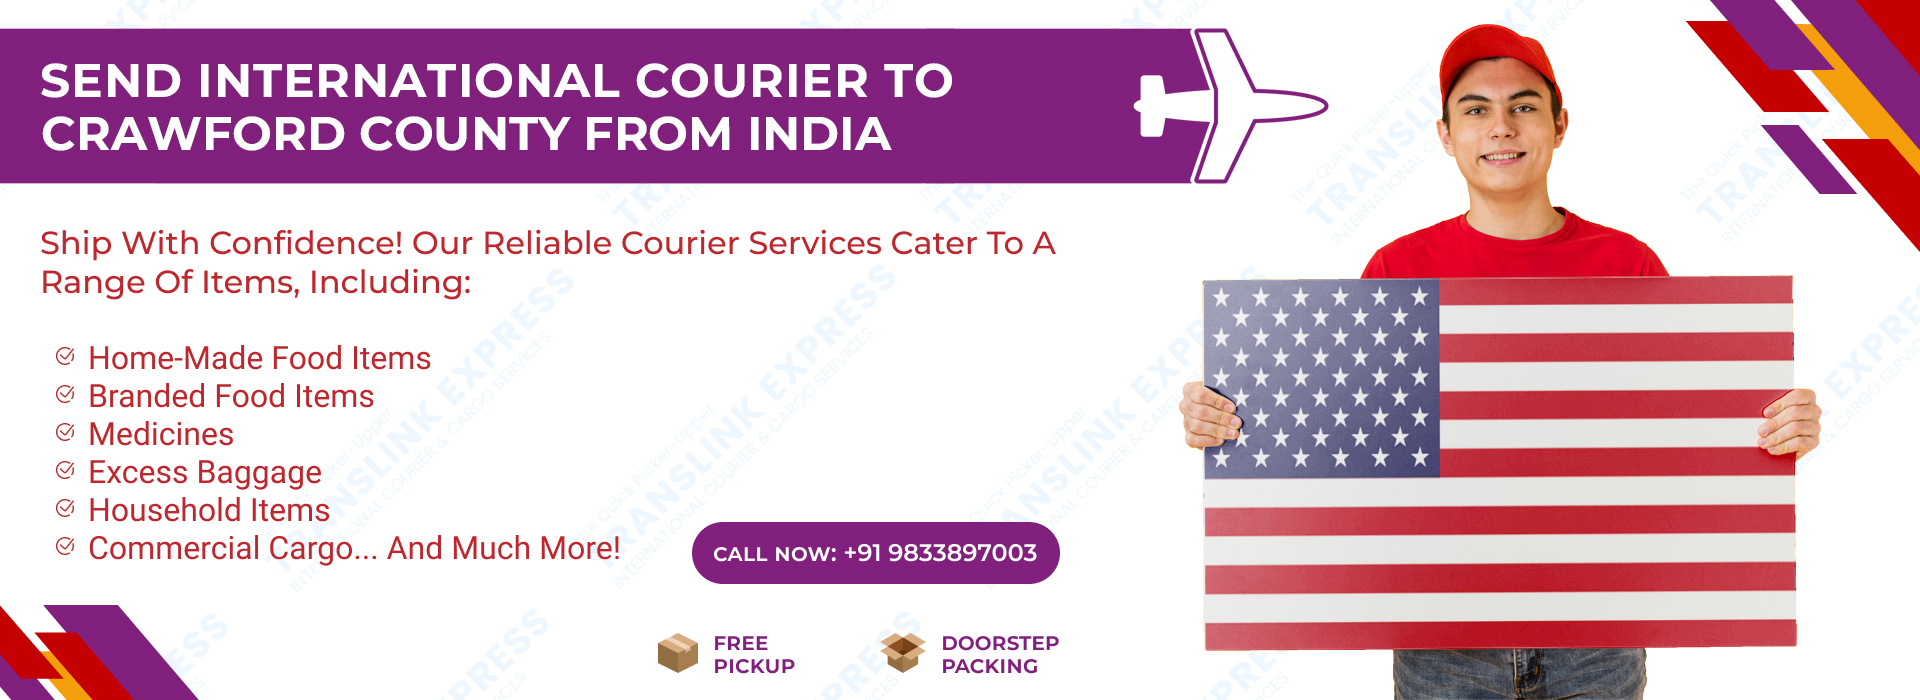 Courier to Crawford County From India